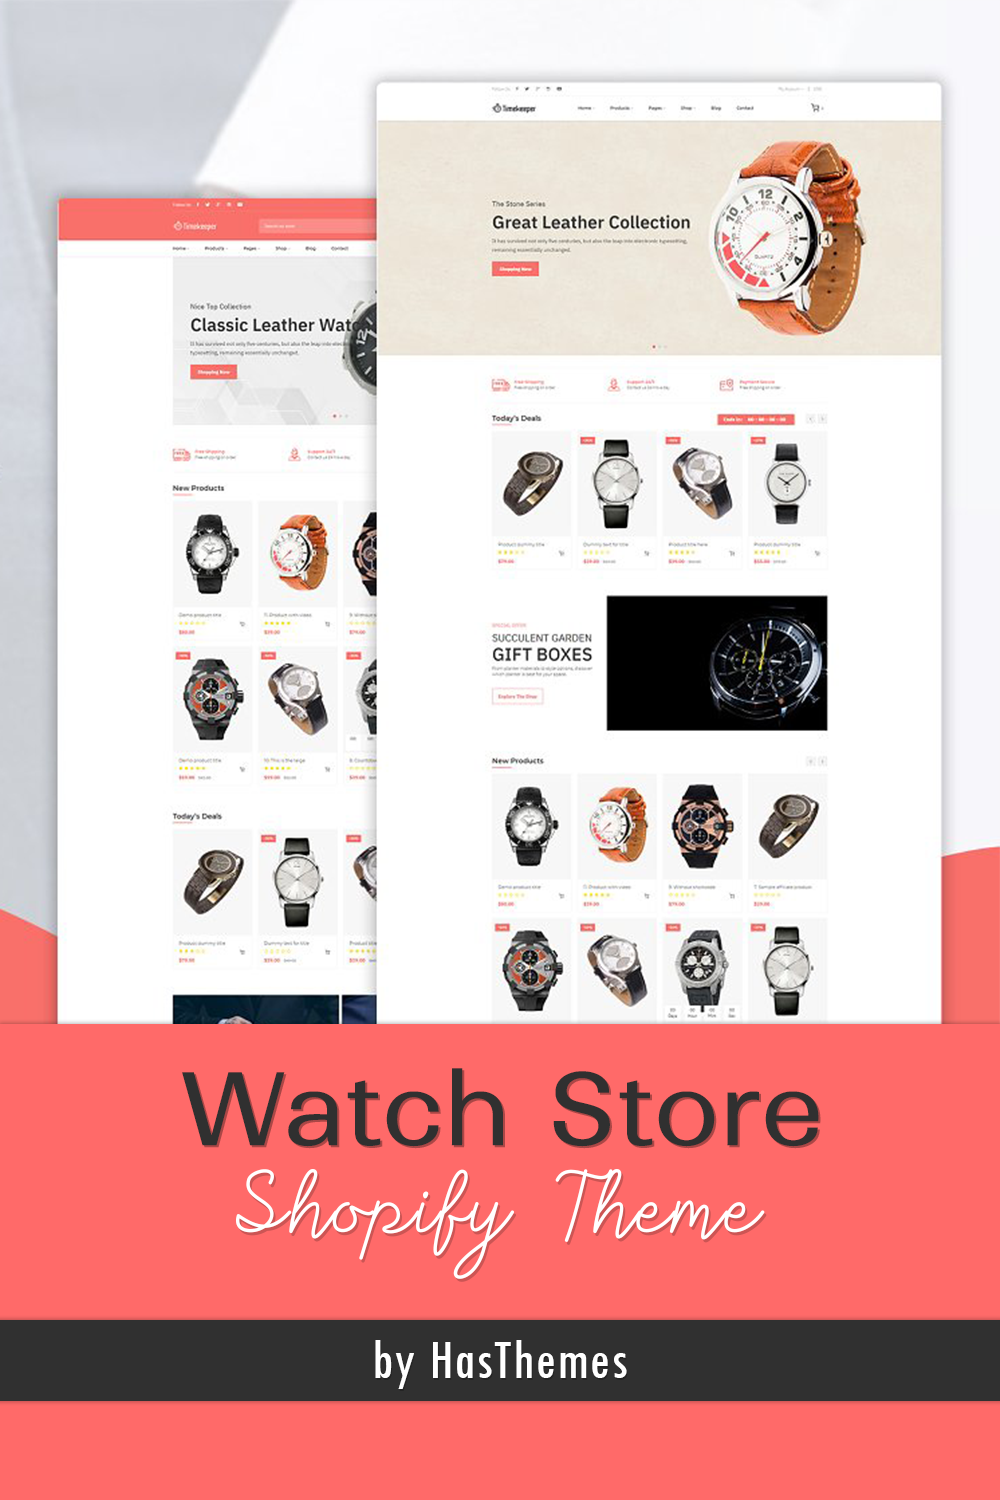 Watch store shopify theme images of pinterest.